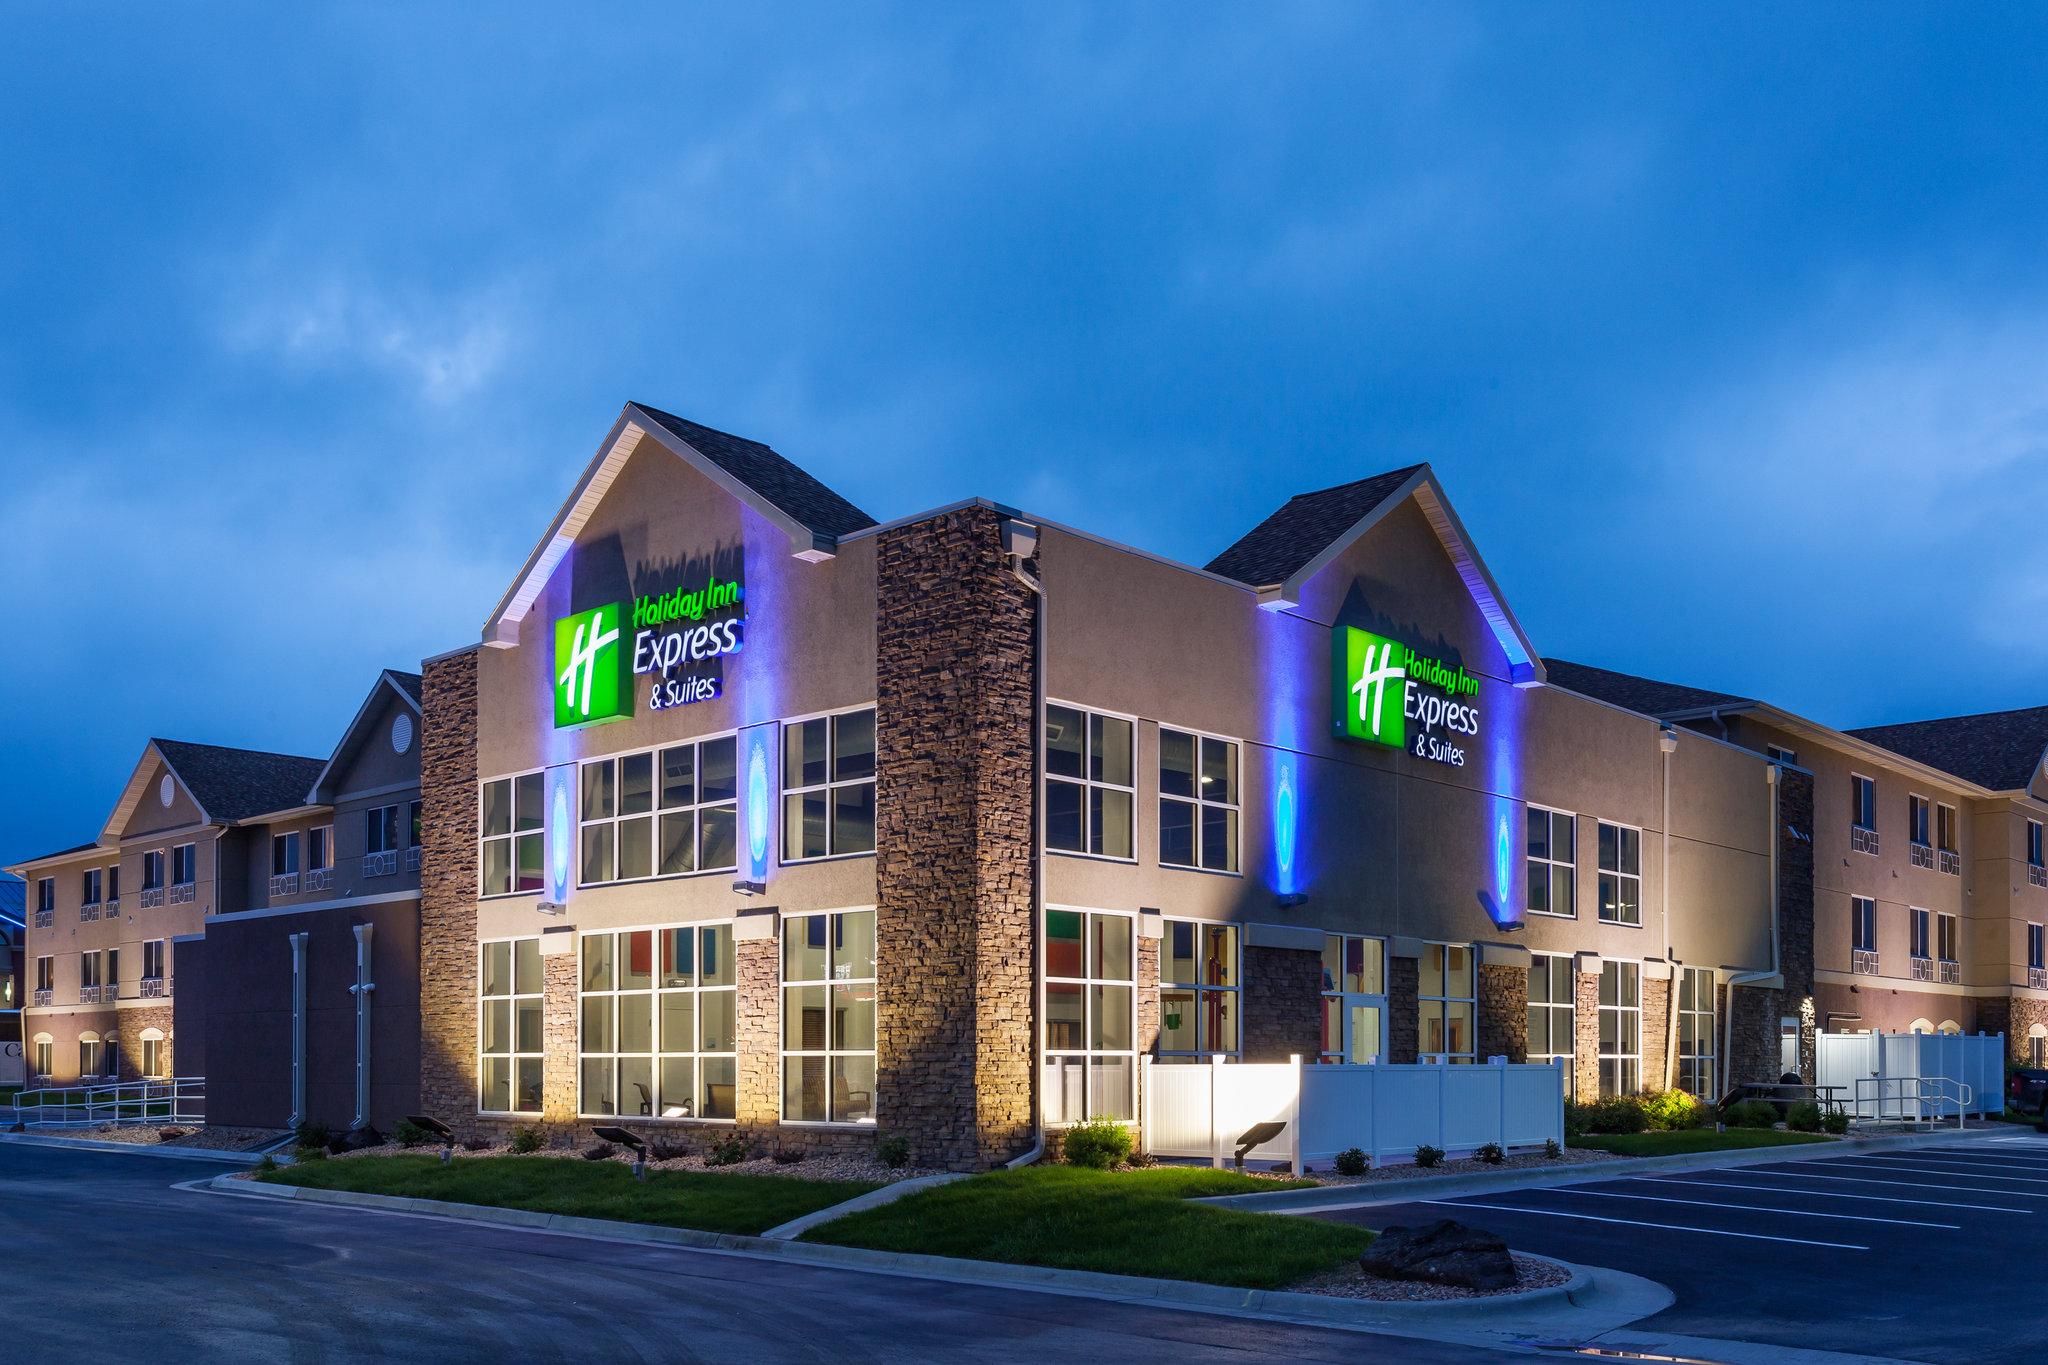 Holiday Inn Express & Suites Rapid City in Rapid City, SD